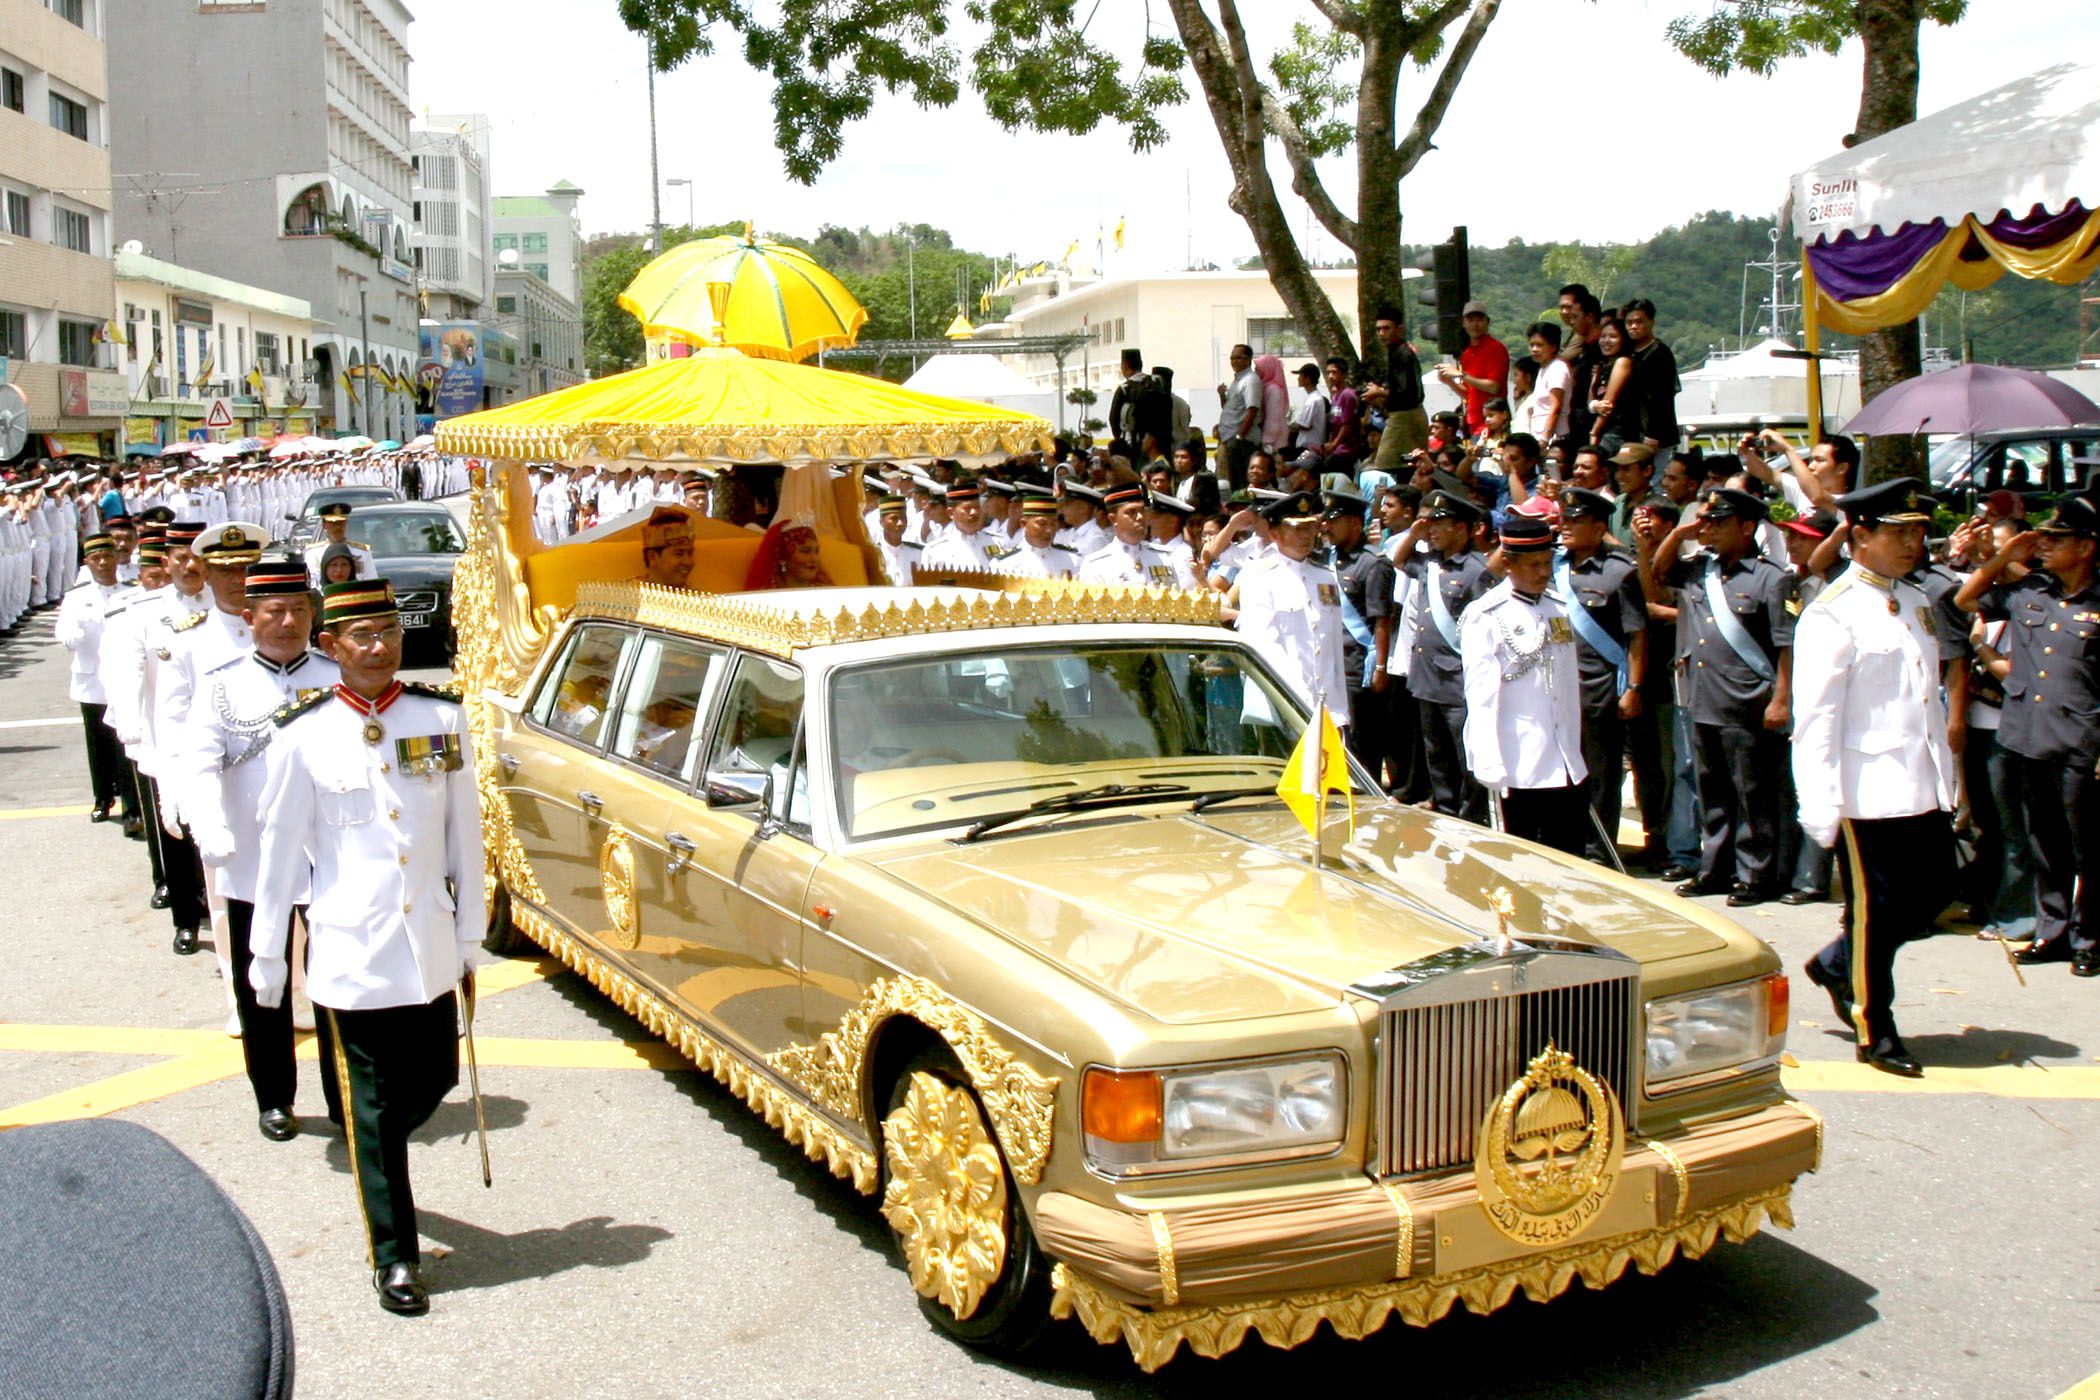 The Sultan of Brunei, Hassanal Bolkiah, holds the world record for the largest collection of cars. It is estimated his entire collection is worth over 4 billion. He also holds the worlds largest private collection of Roll Royces. It is believed that during the 1990s his family purchased half of the Rolls Royces sold throughout the entire world. He had the company design a very special car for his wedding day. The Sultan purchased a Rolls Royce Silver Spur stretch limousine and had it plated with pure 24 carat gold. It is valued at a mind boggling 14 million.